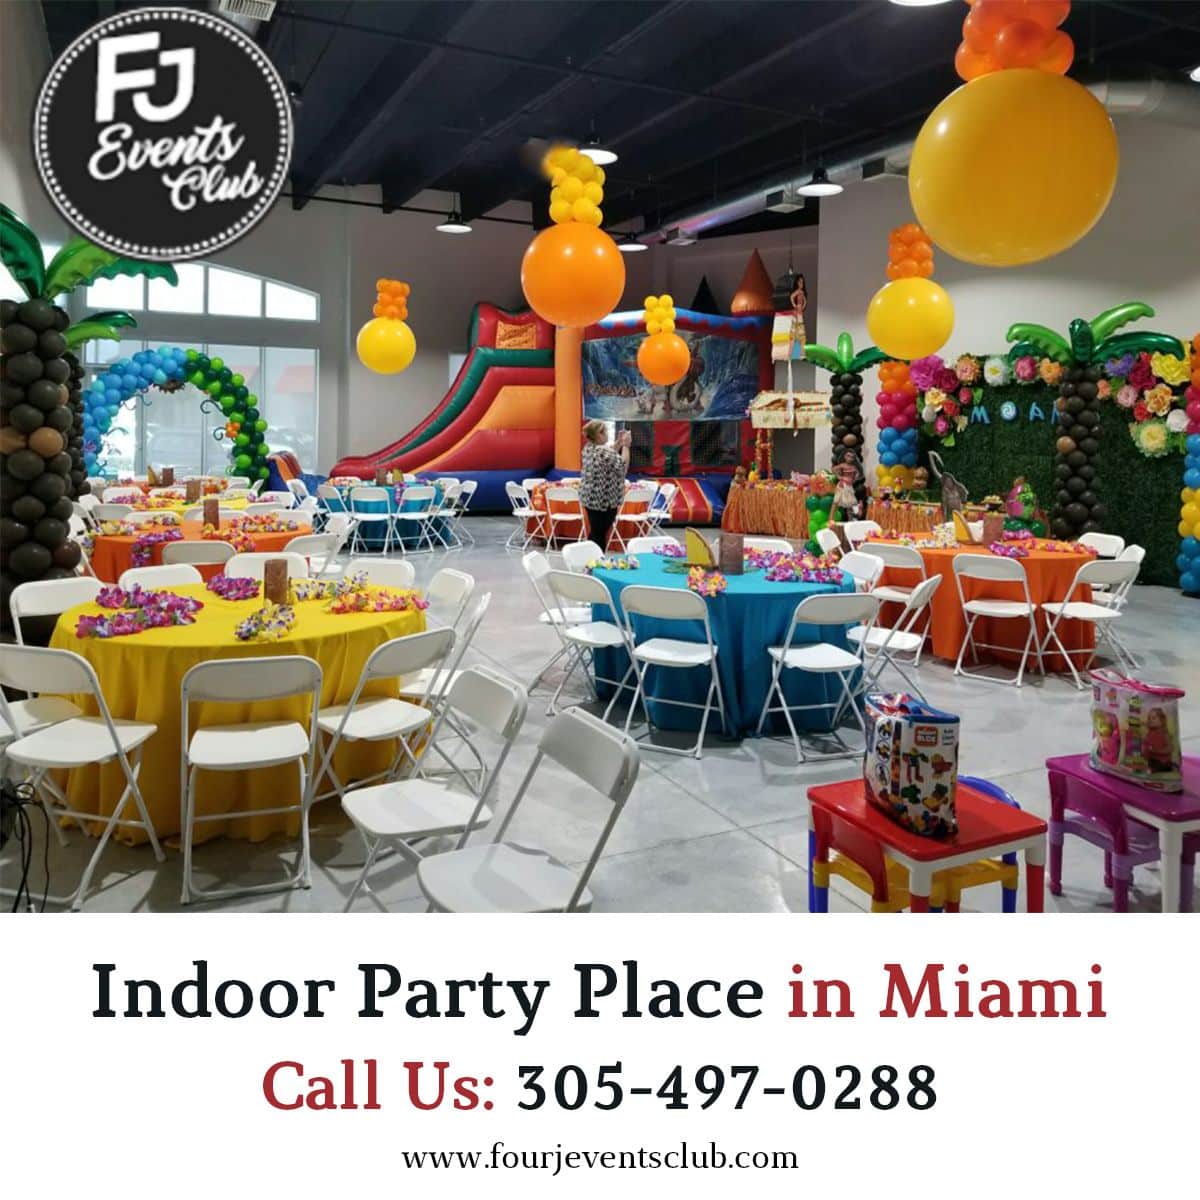 Indoor Party Place in Miami